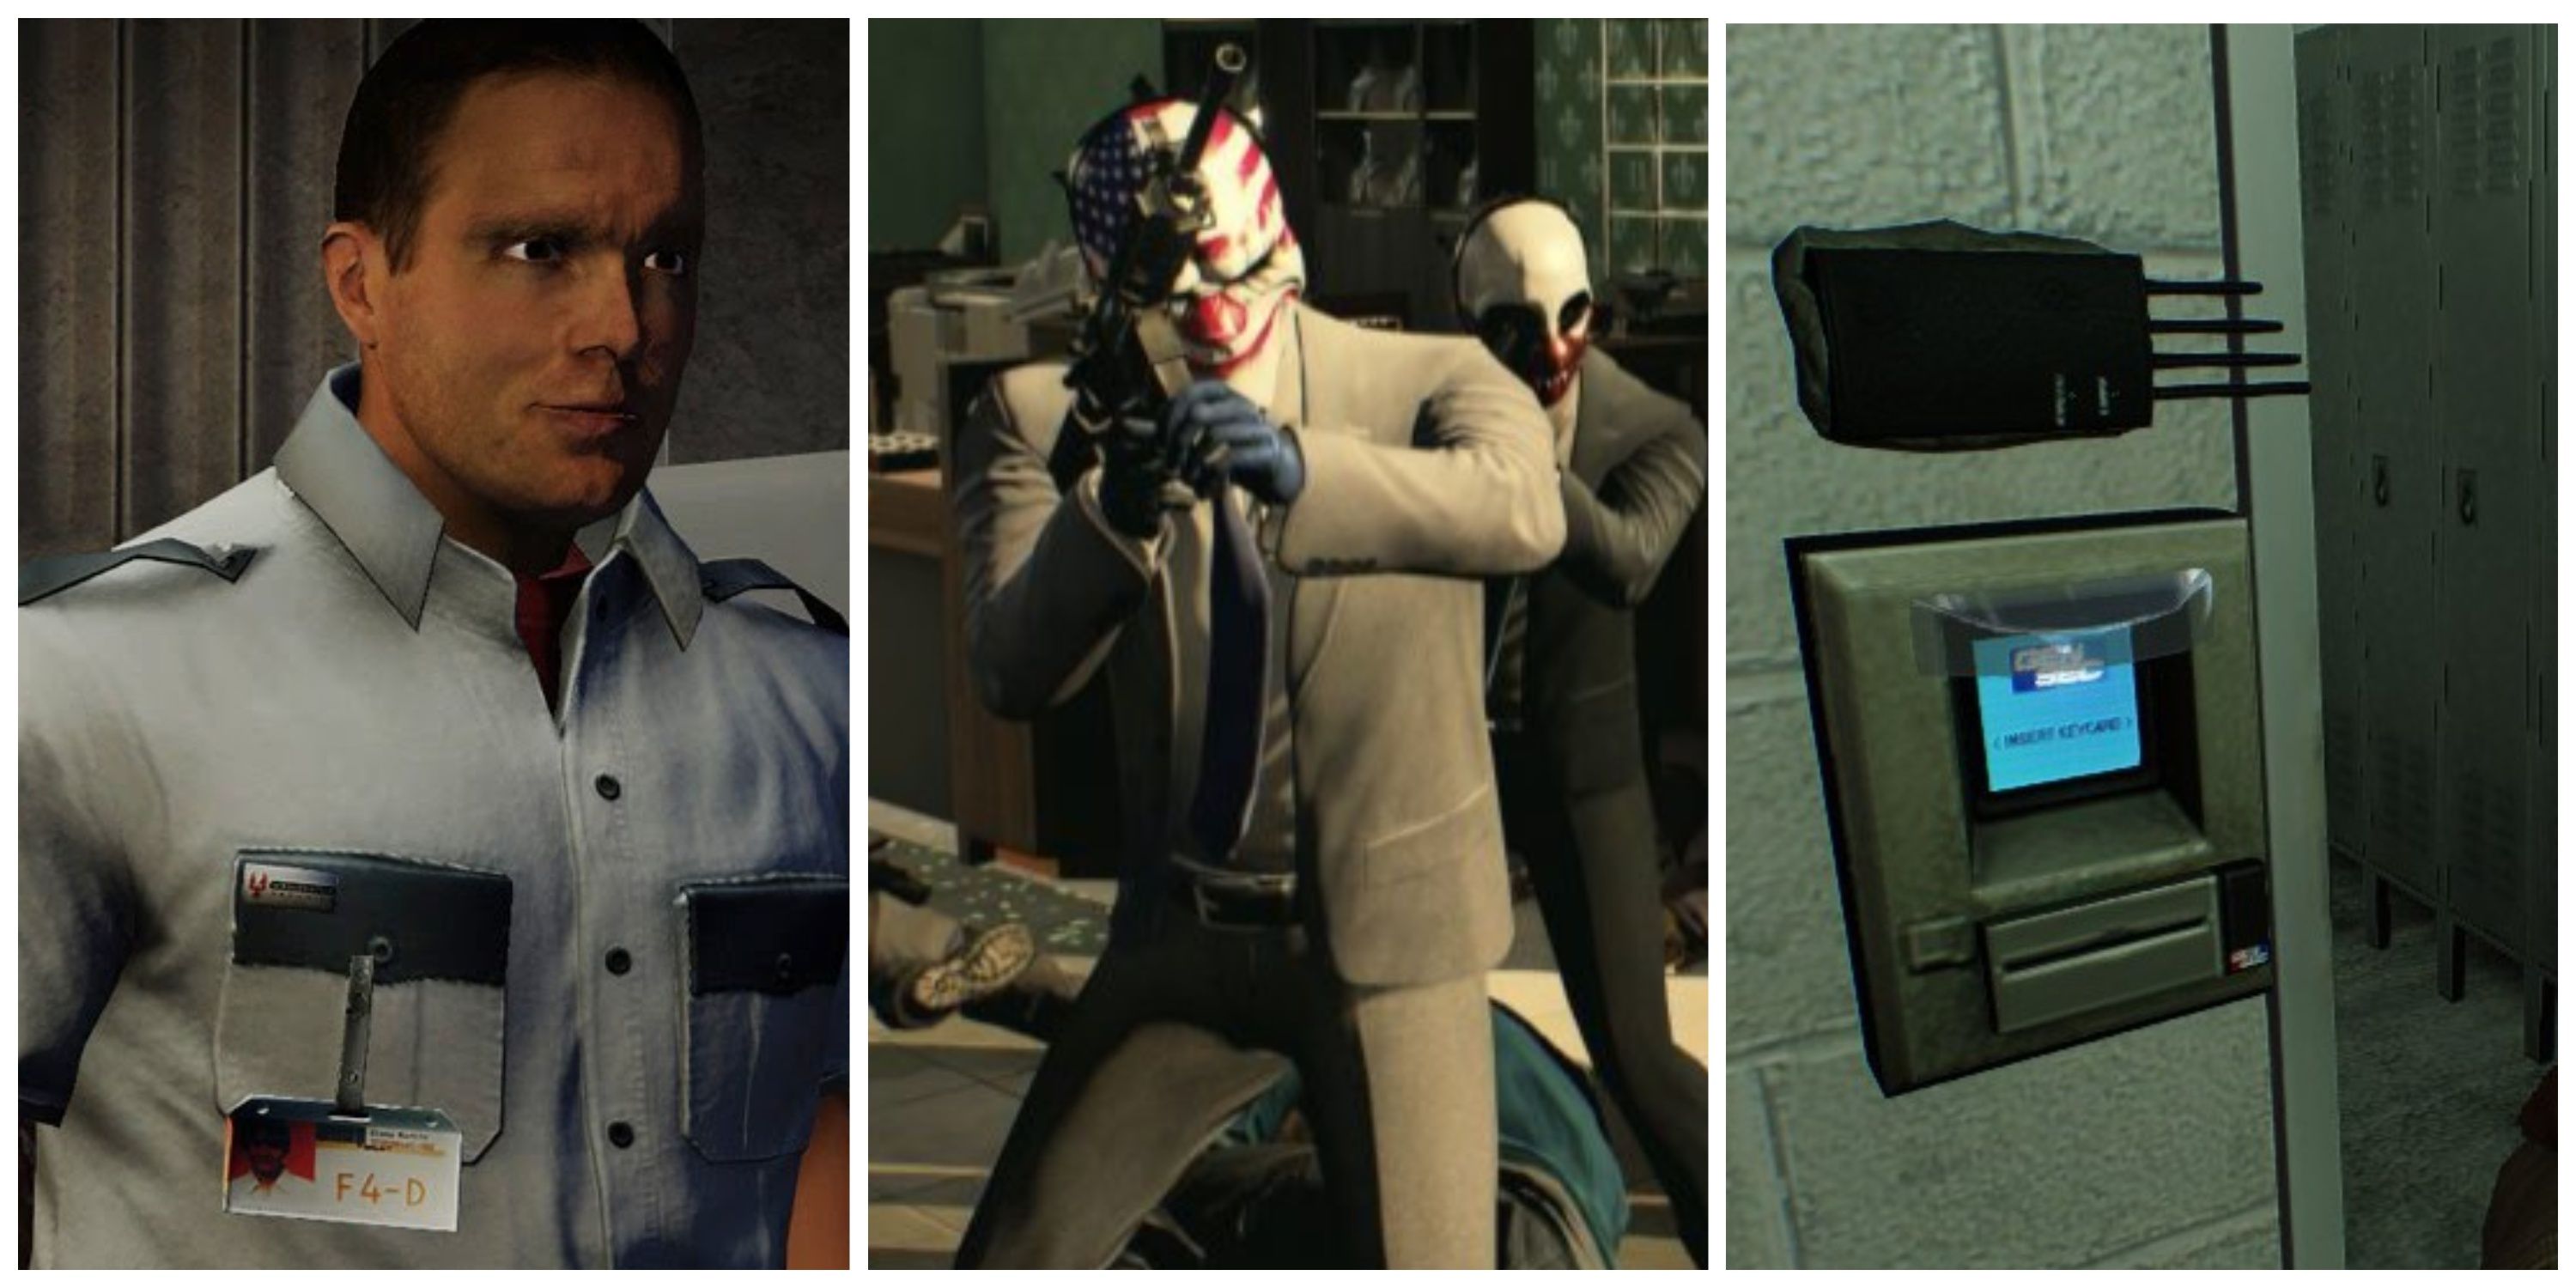 payday 2 guard, dallas and wolf with silenced weapons, ecm on a door